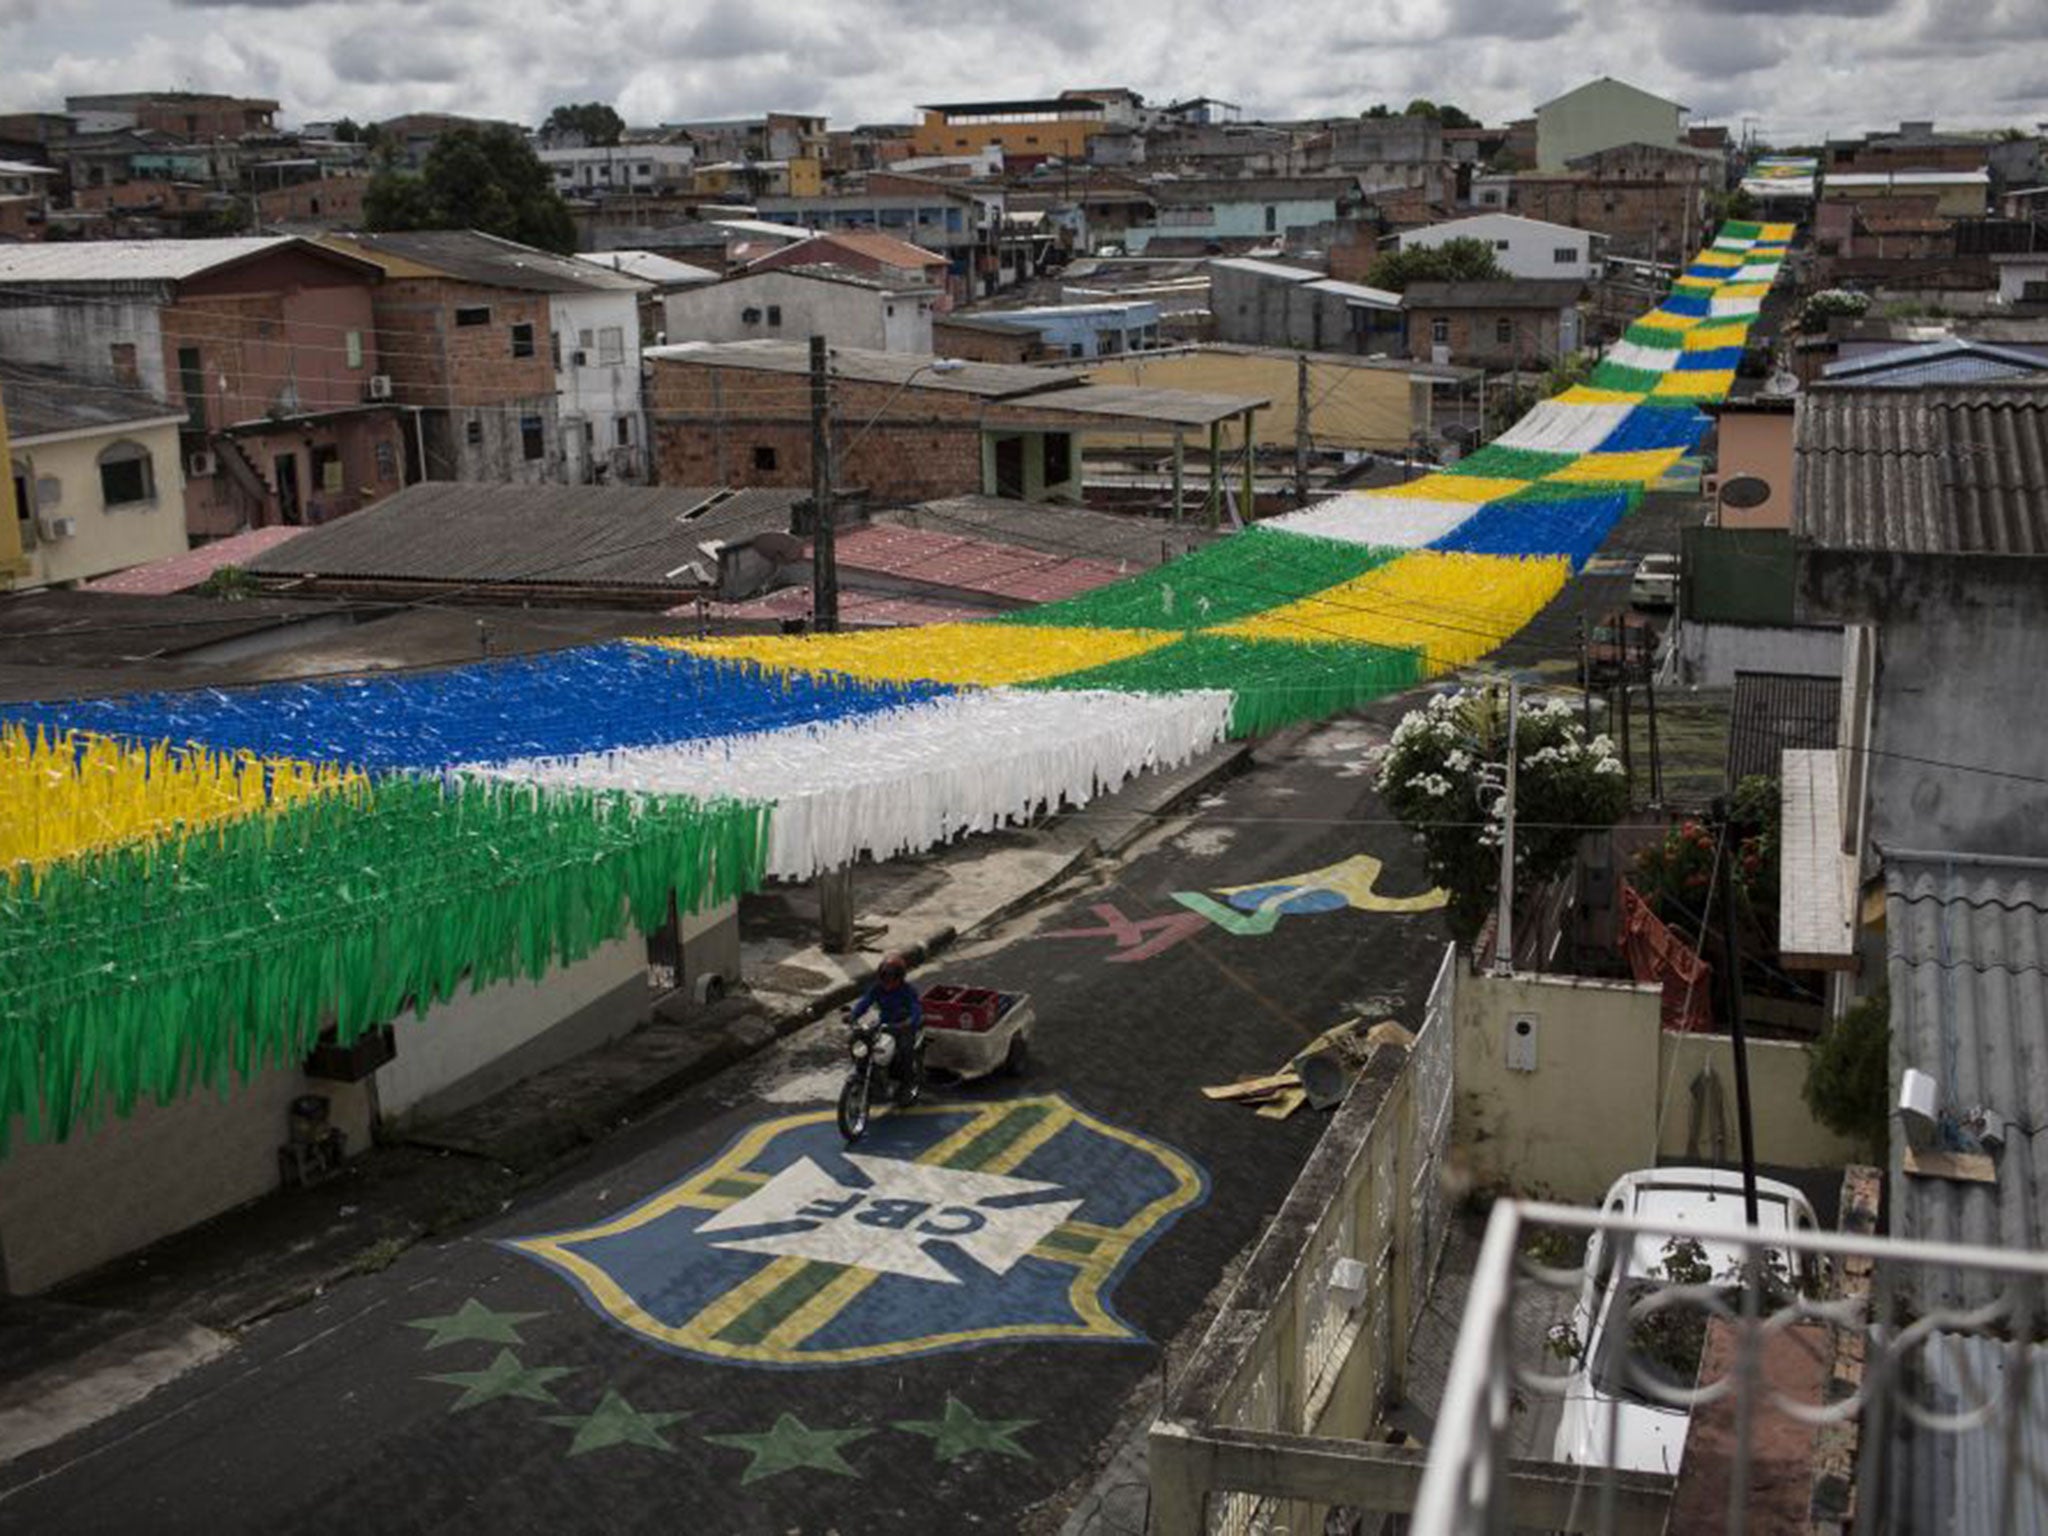 The streets of Manaus have been decorated ahead of the World Cup